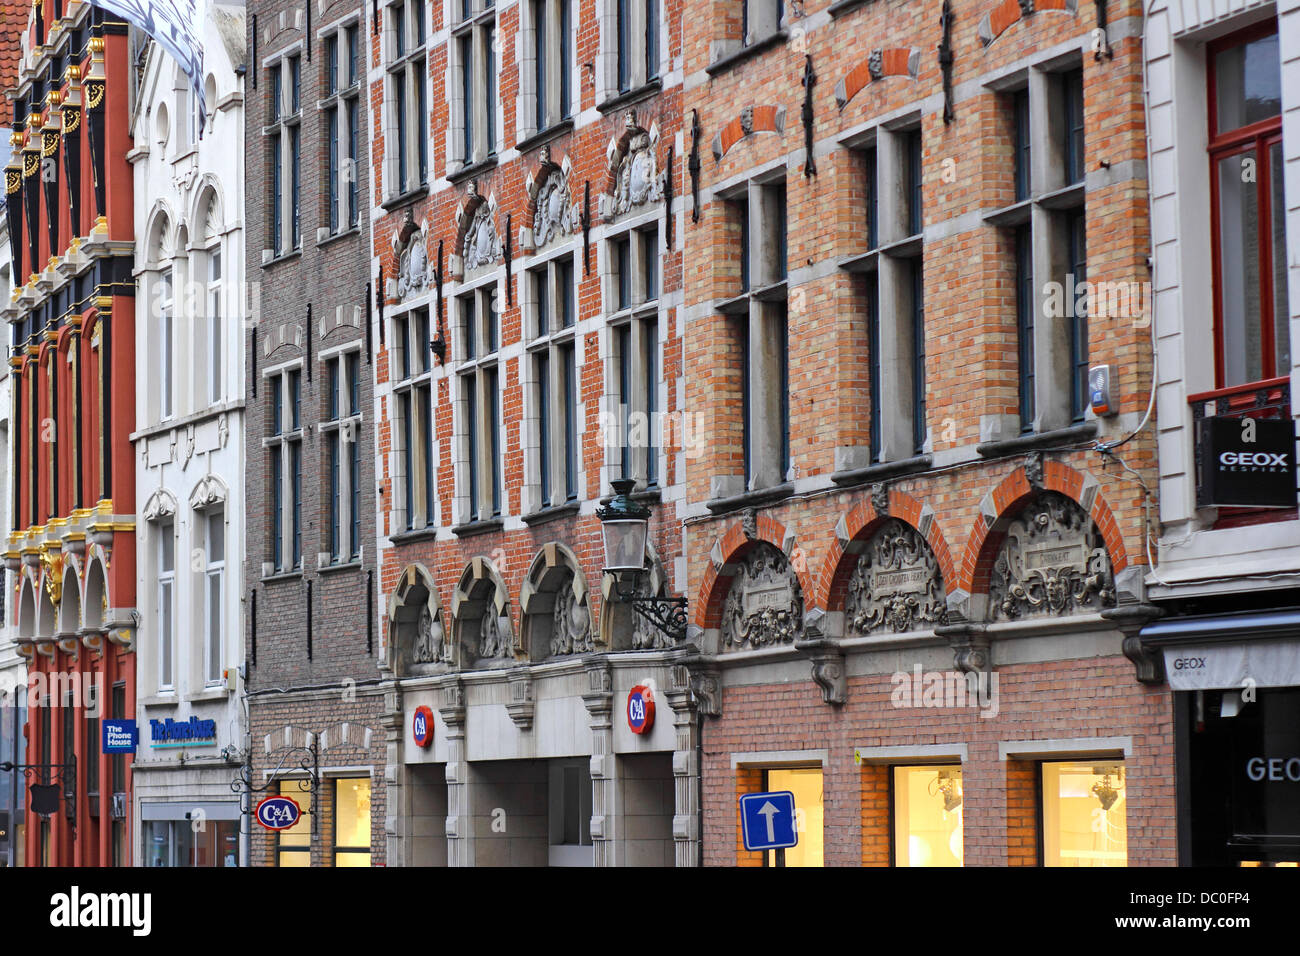 Brugge Shopping High Resolution Stock Photography and Images - Alamy